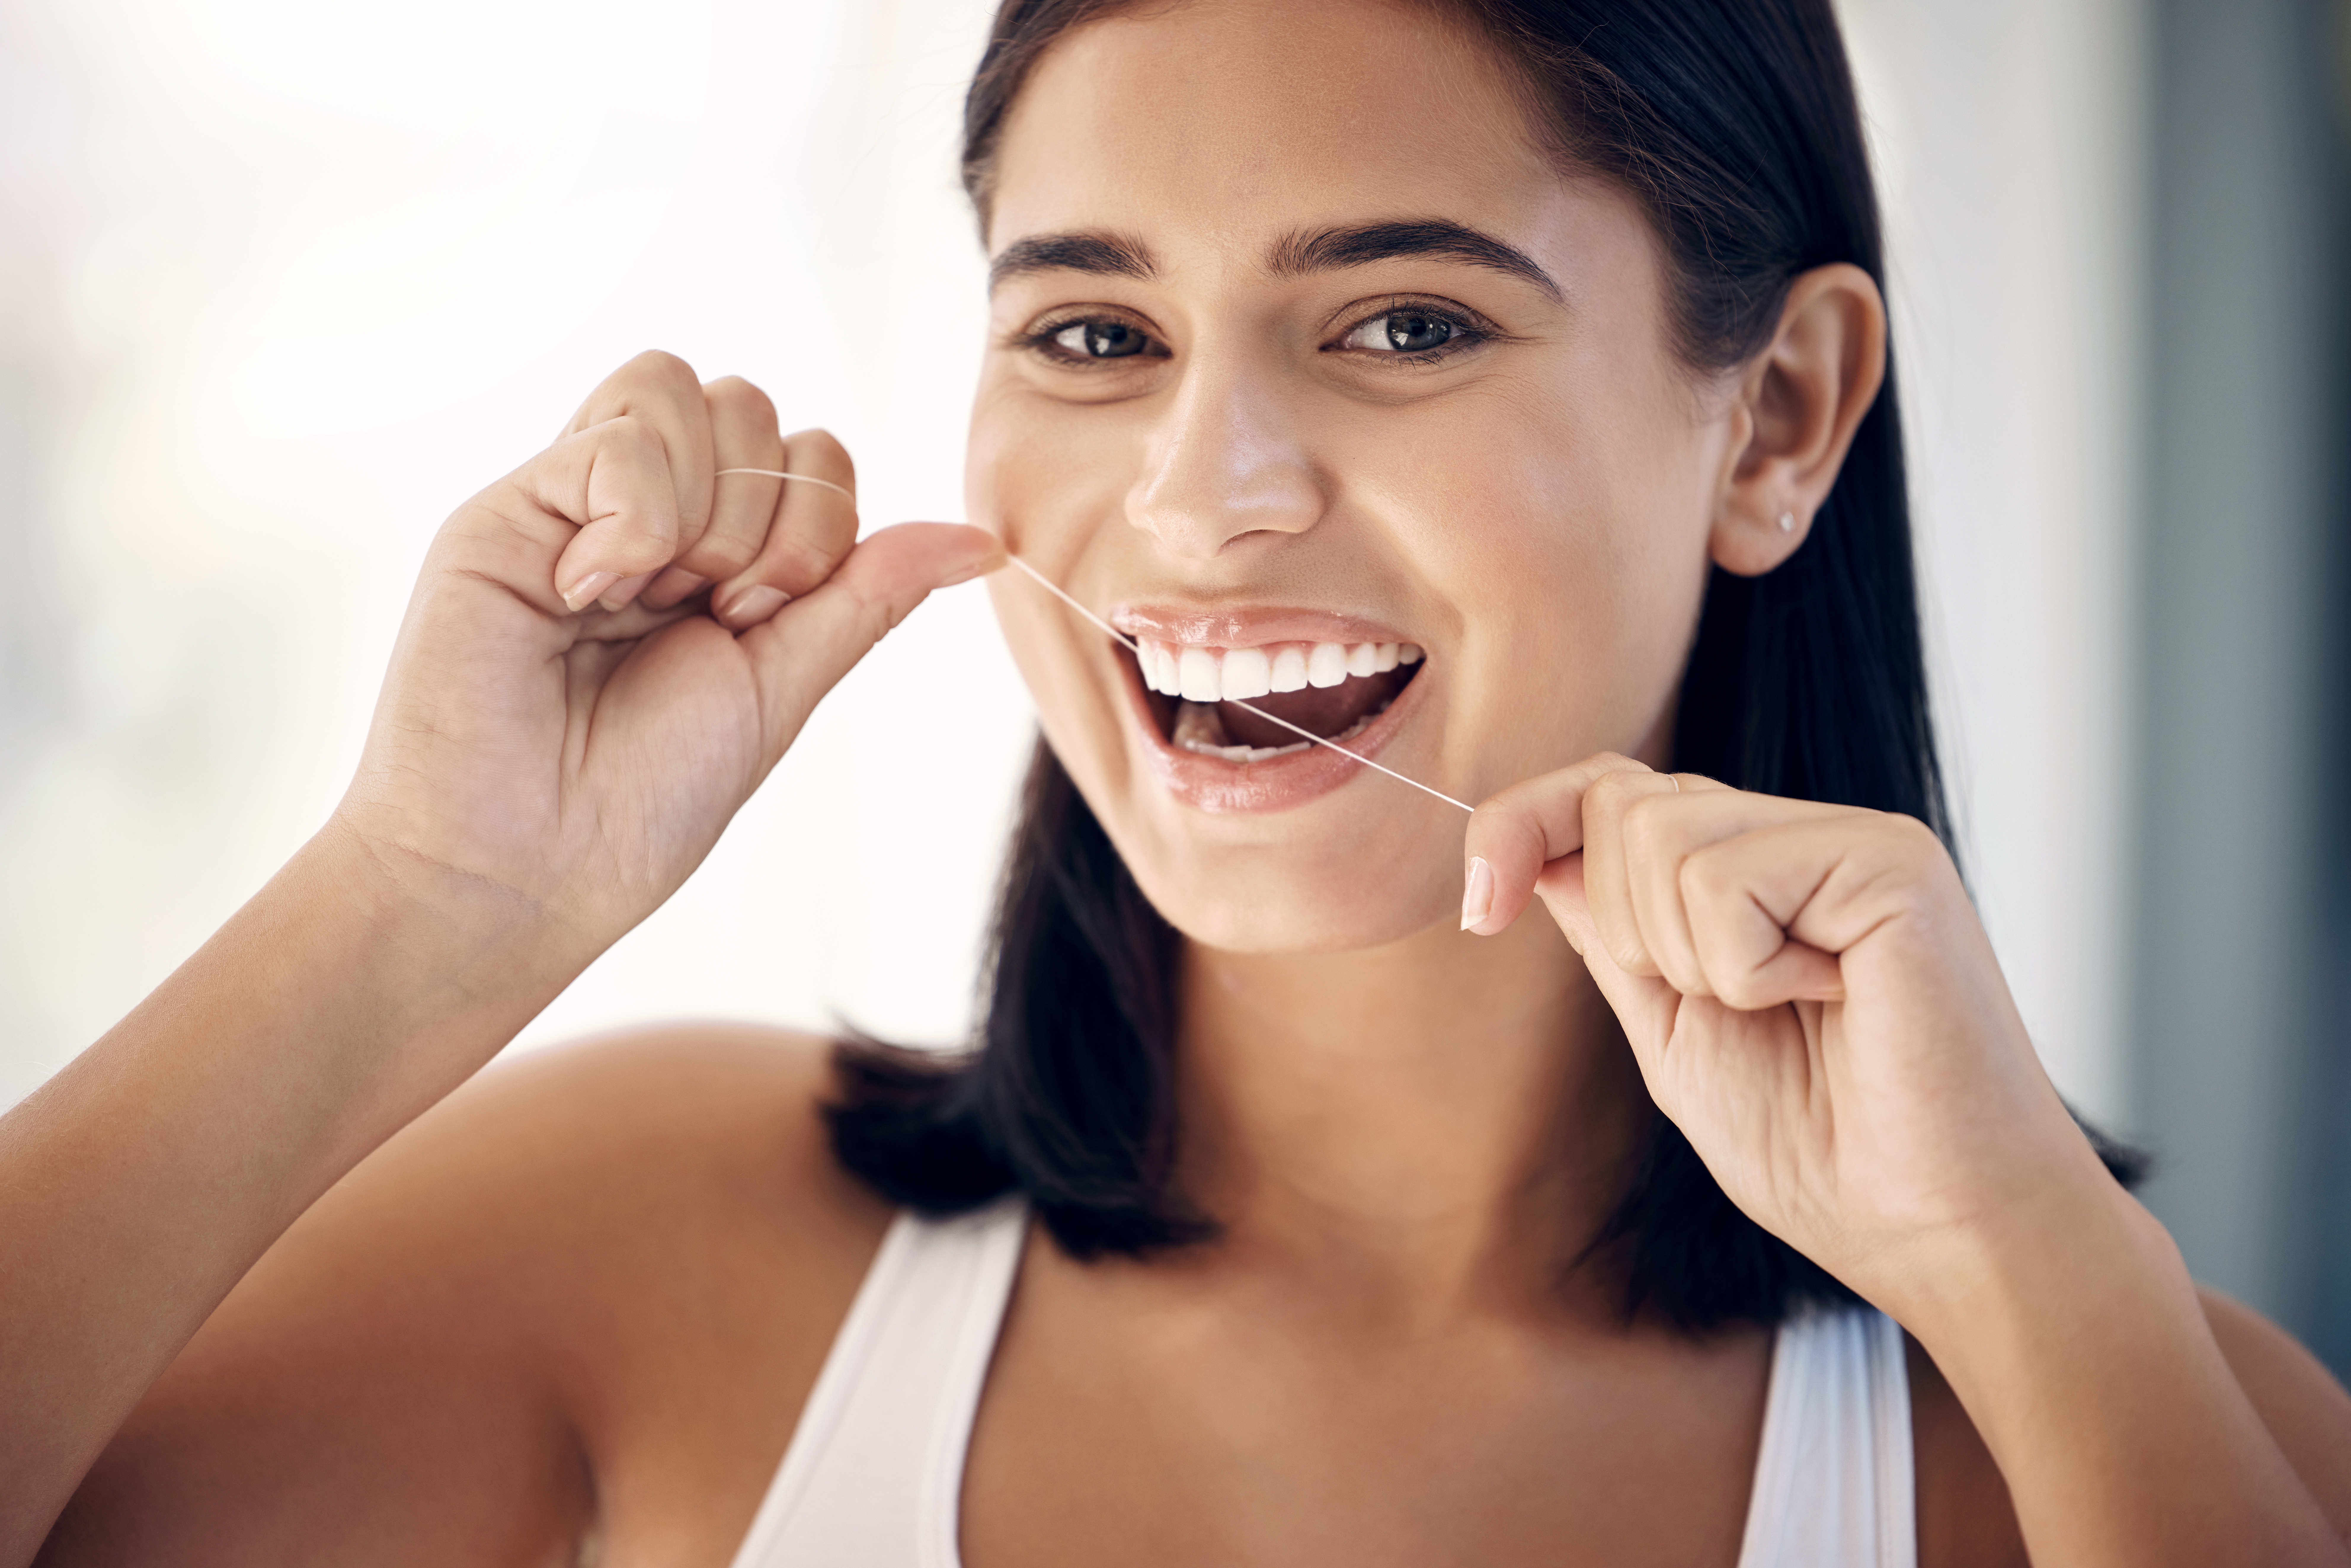 5 Findings About Gum Disease That Will Have You Reaching for Your Dental Floss